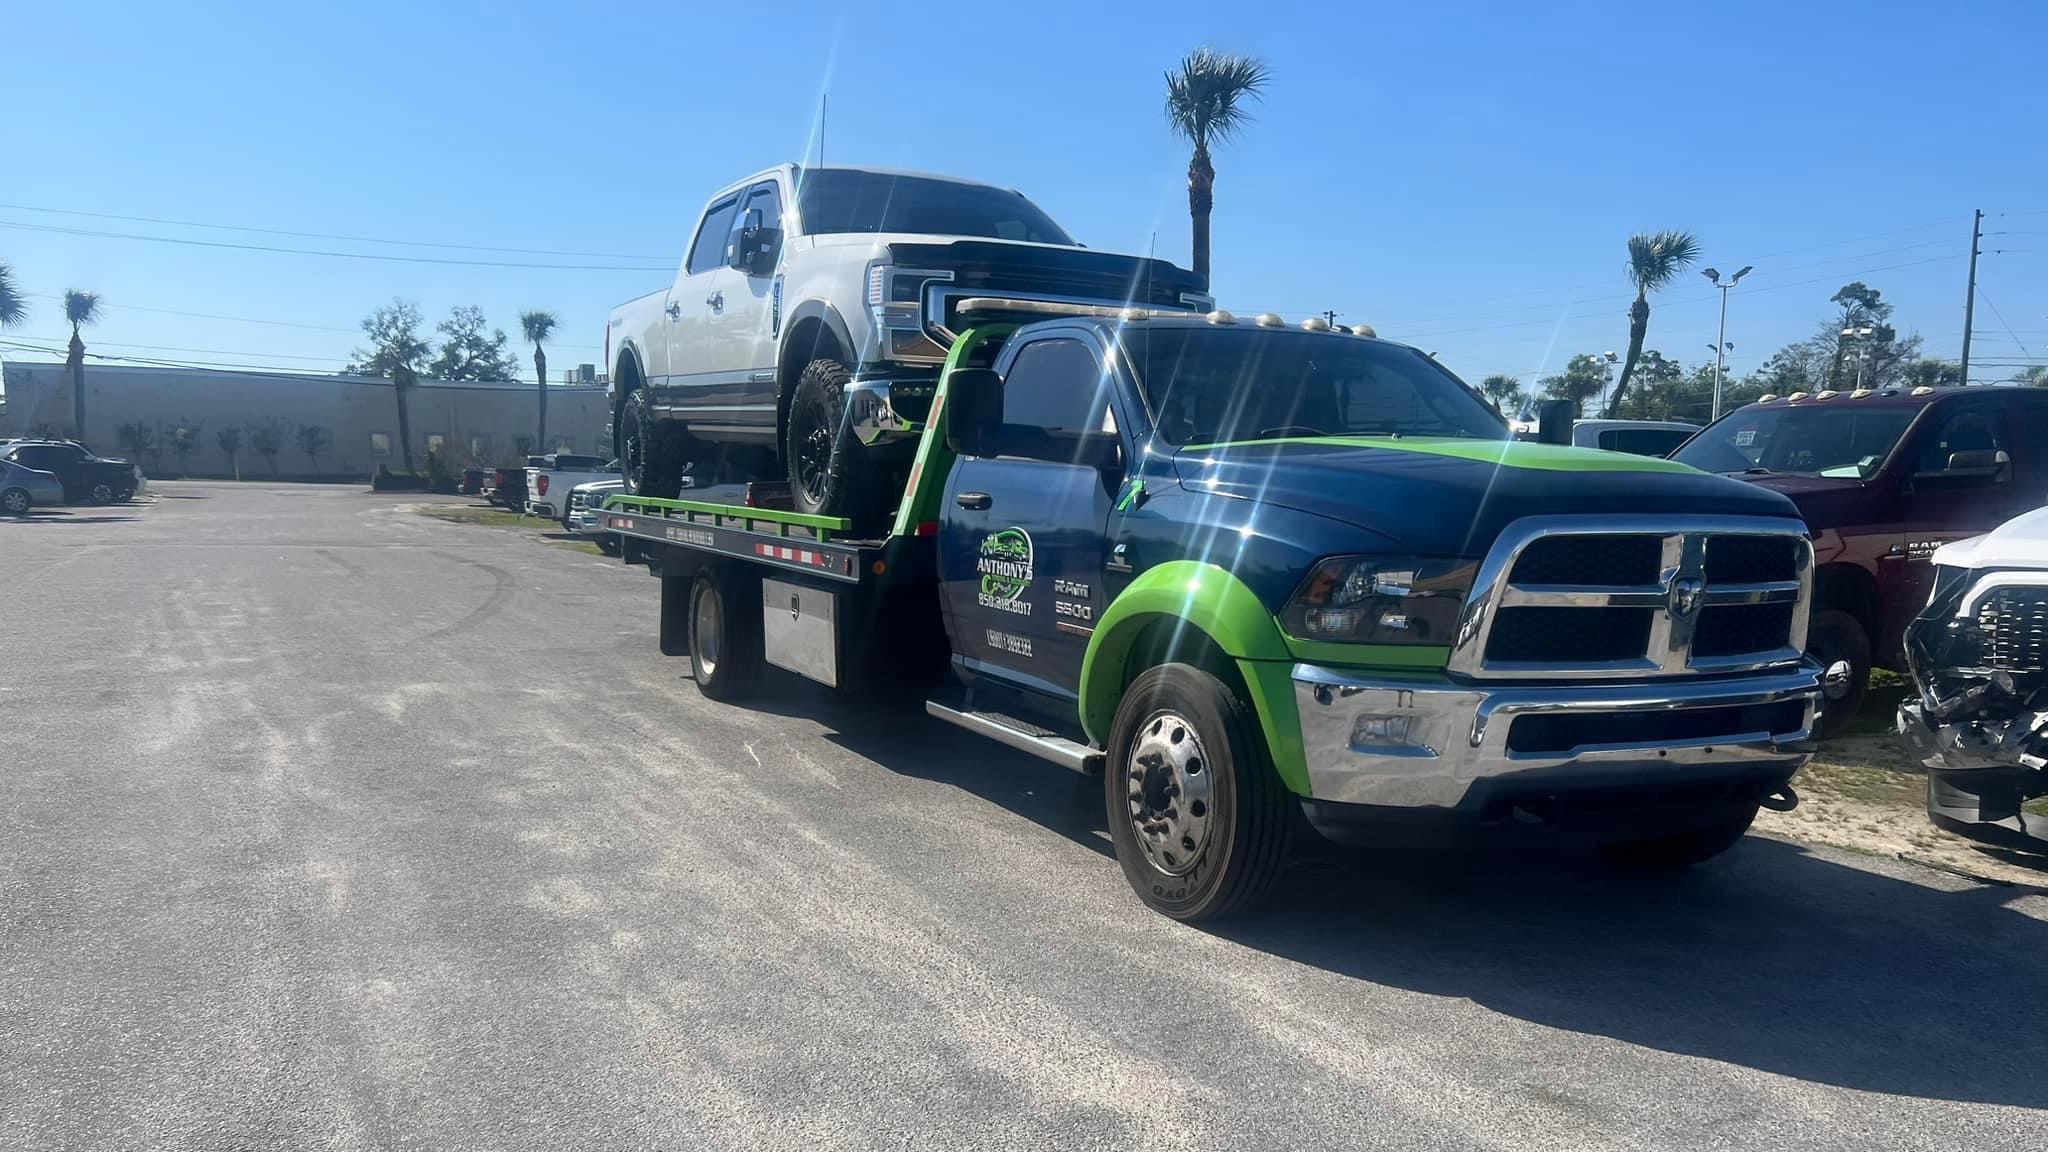 Moffo's Towing & Repair offers comprehensive wrecker services to handle a variety of towing needs. I Moffo's Towing & Repair Jacksonville (904)946-1926